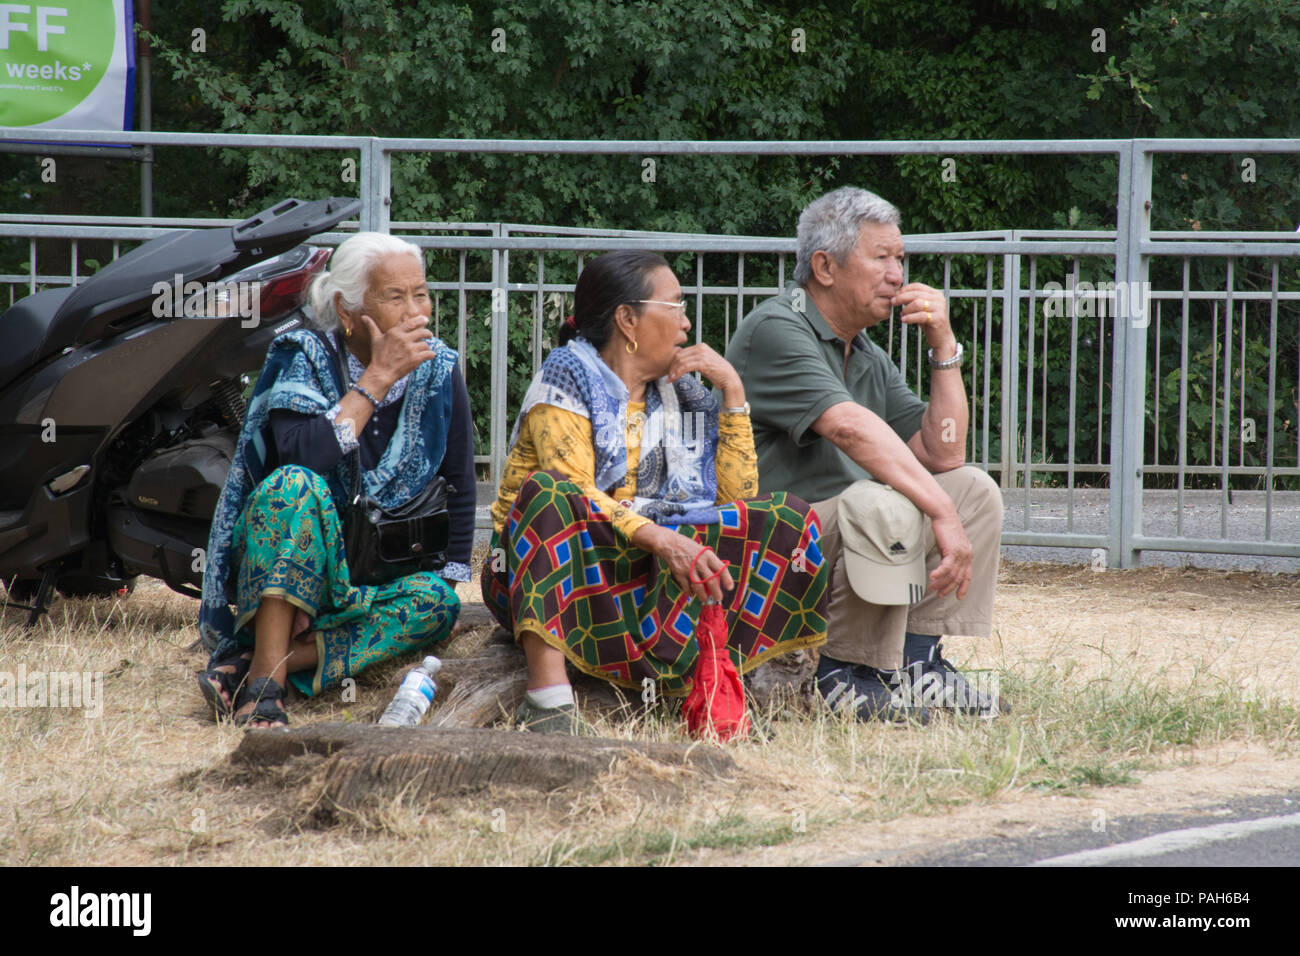 Three older Nepalese Gurkha people sitting on a treestump watching the Farnborough International Airshow, 2018 during the heatwave with parched grass Stock Photo